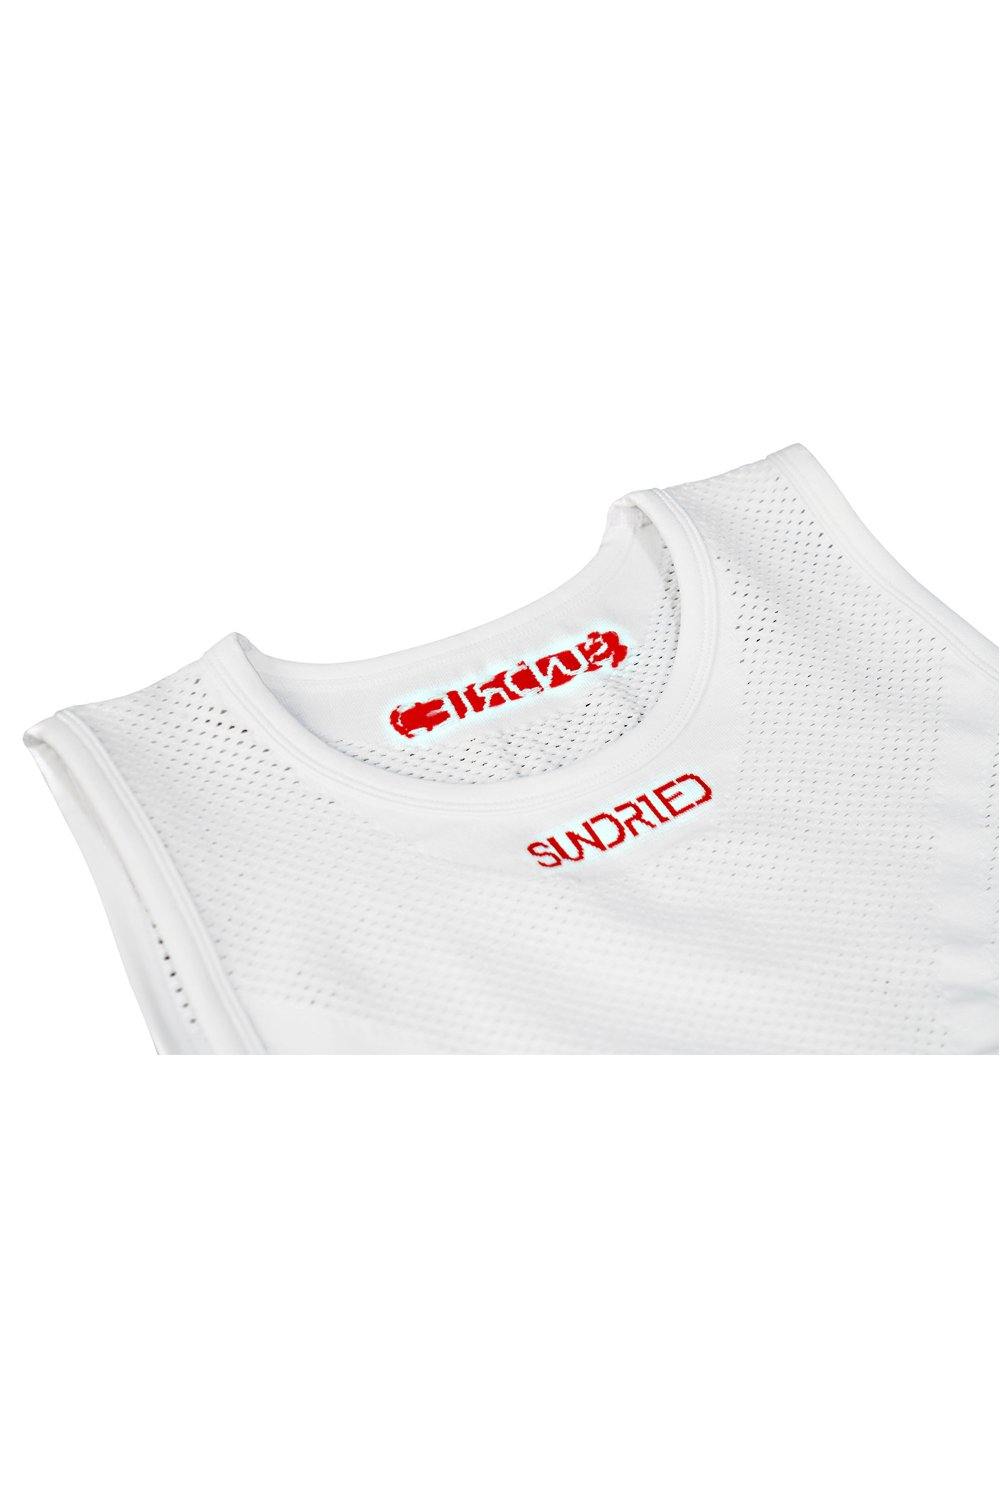 Sundried Thermal Cycling Vest Baselayer Activewear